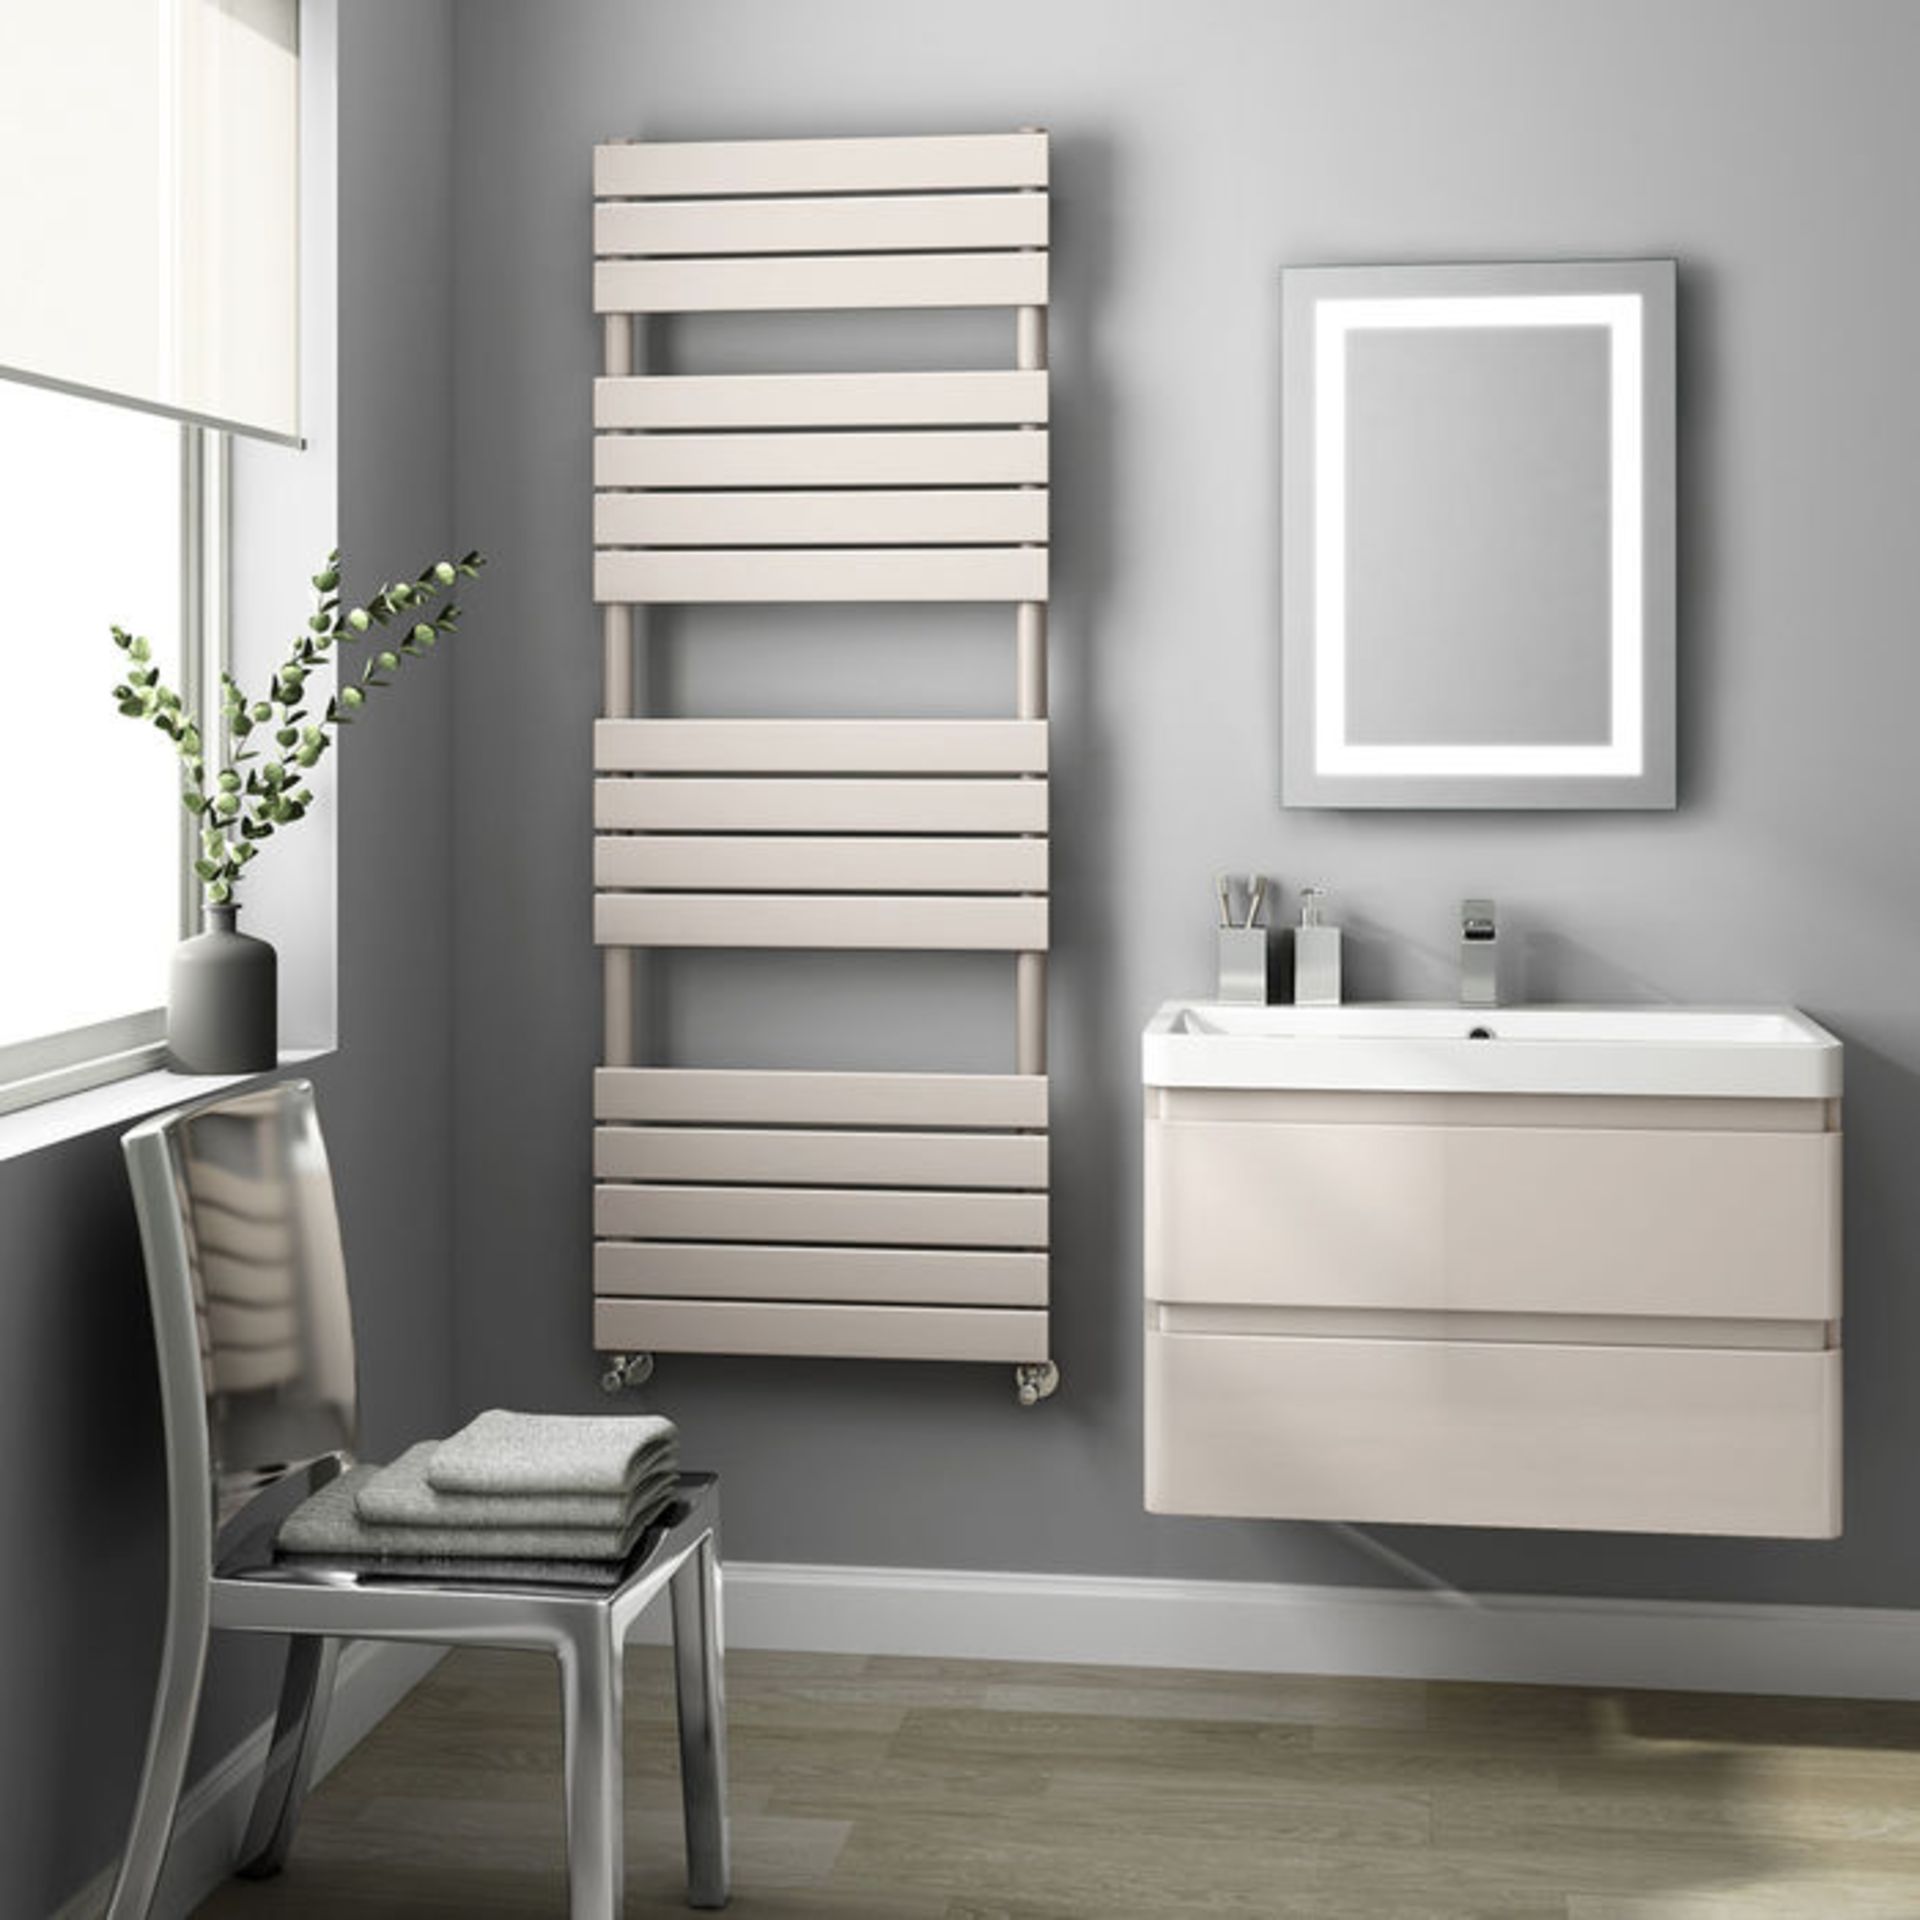 (W220) 1600x600mm Latte Flat Panel Ladder Towel Radiator. Made from high quality low carbon steel - Image 2 of 3